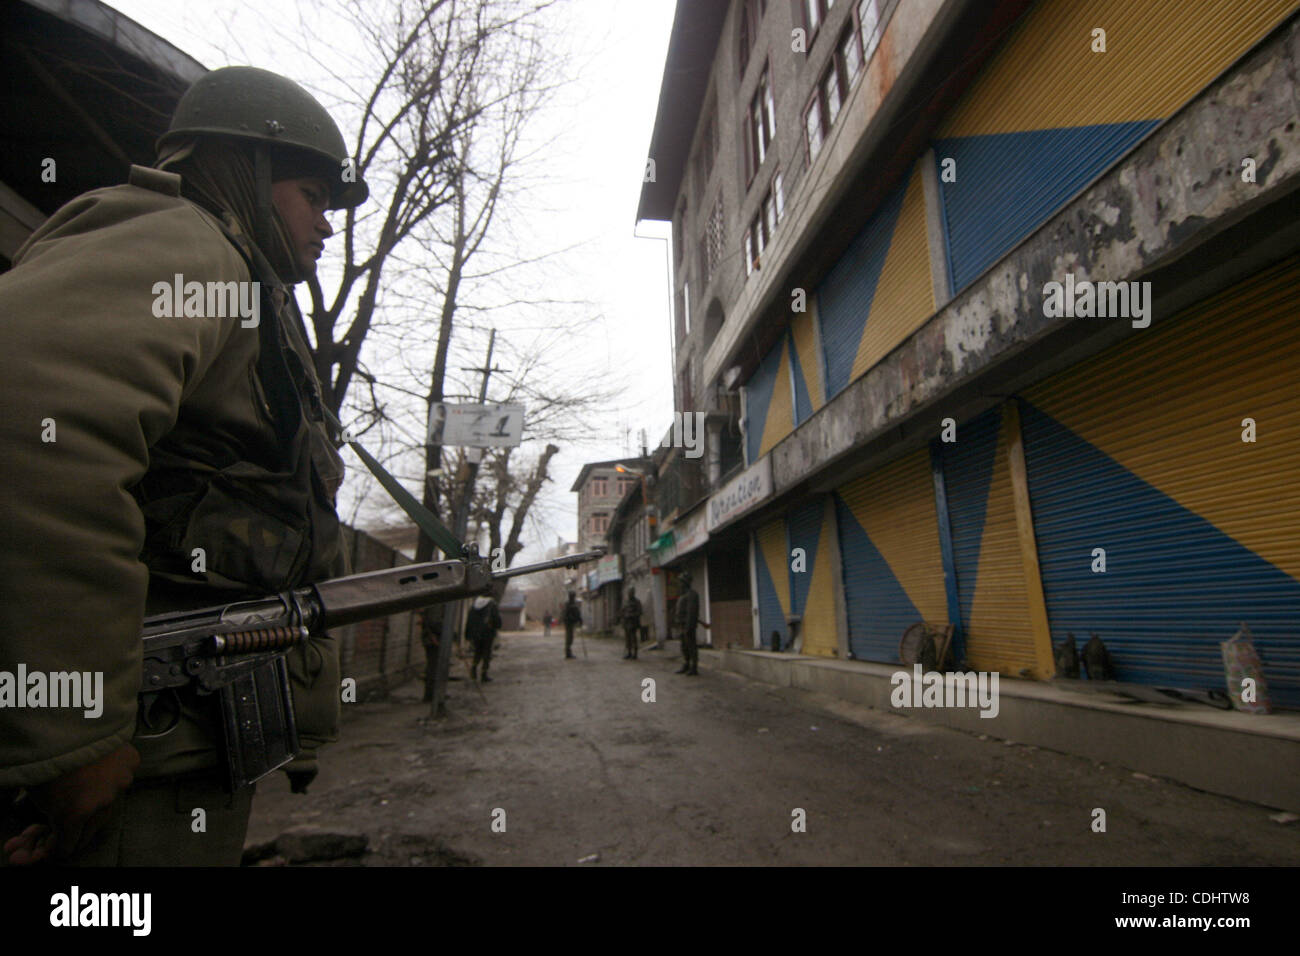 Feb 11, 2011 - Srinagar, Kashmir, India - Indian Central Reserve Police Force (CRPF) soldiers stand guard during a one day strike to mark the 27th death anniversary of Jammu and Kashmir Liberation Front (JKLF) founder Maqbool Bhat in Srinagar the summer capital of Indian Kashmir. Kashmiri seperatist Stock Photo